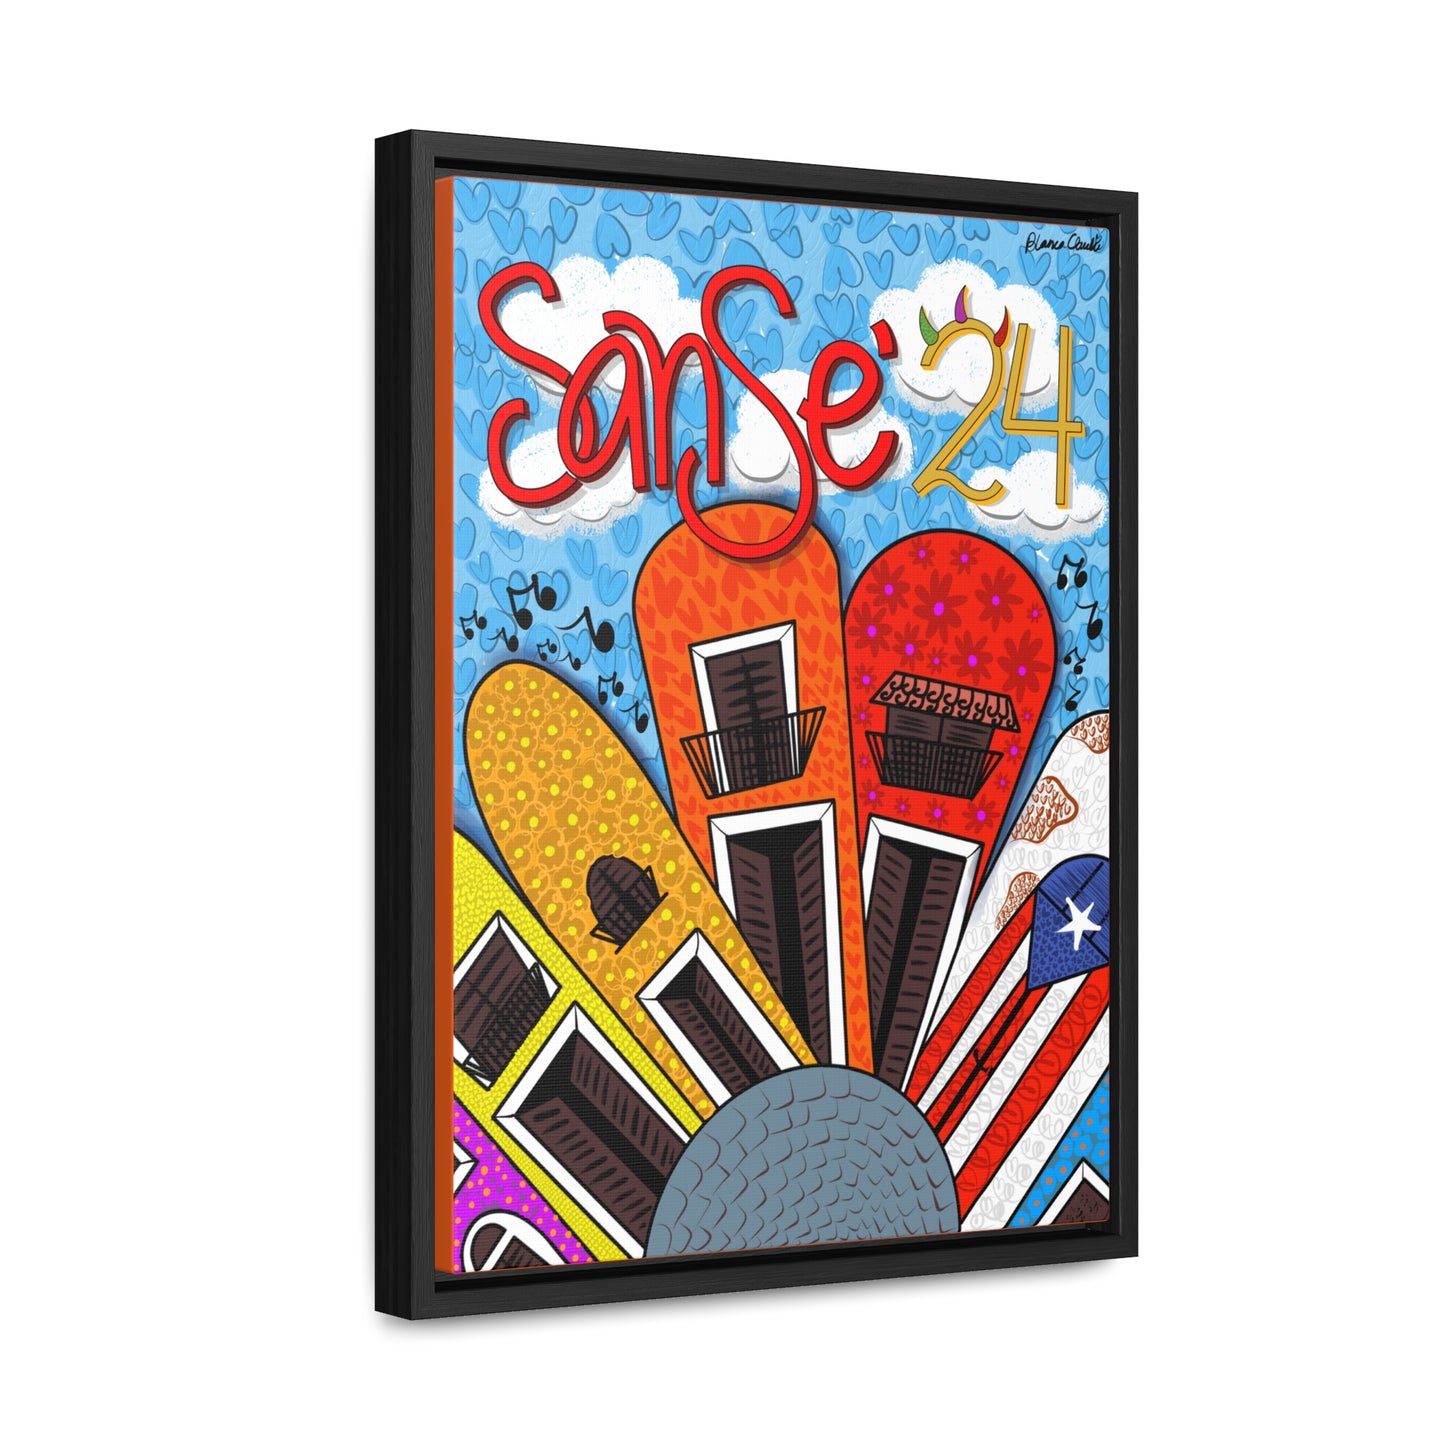 SanSe 24 Poster Yellow Gallery Canvas Wraps, Vertical Frame 12" x 16"